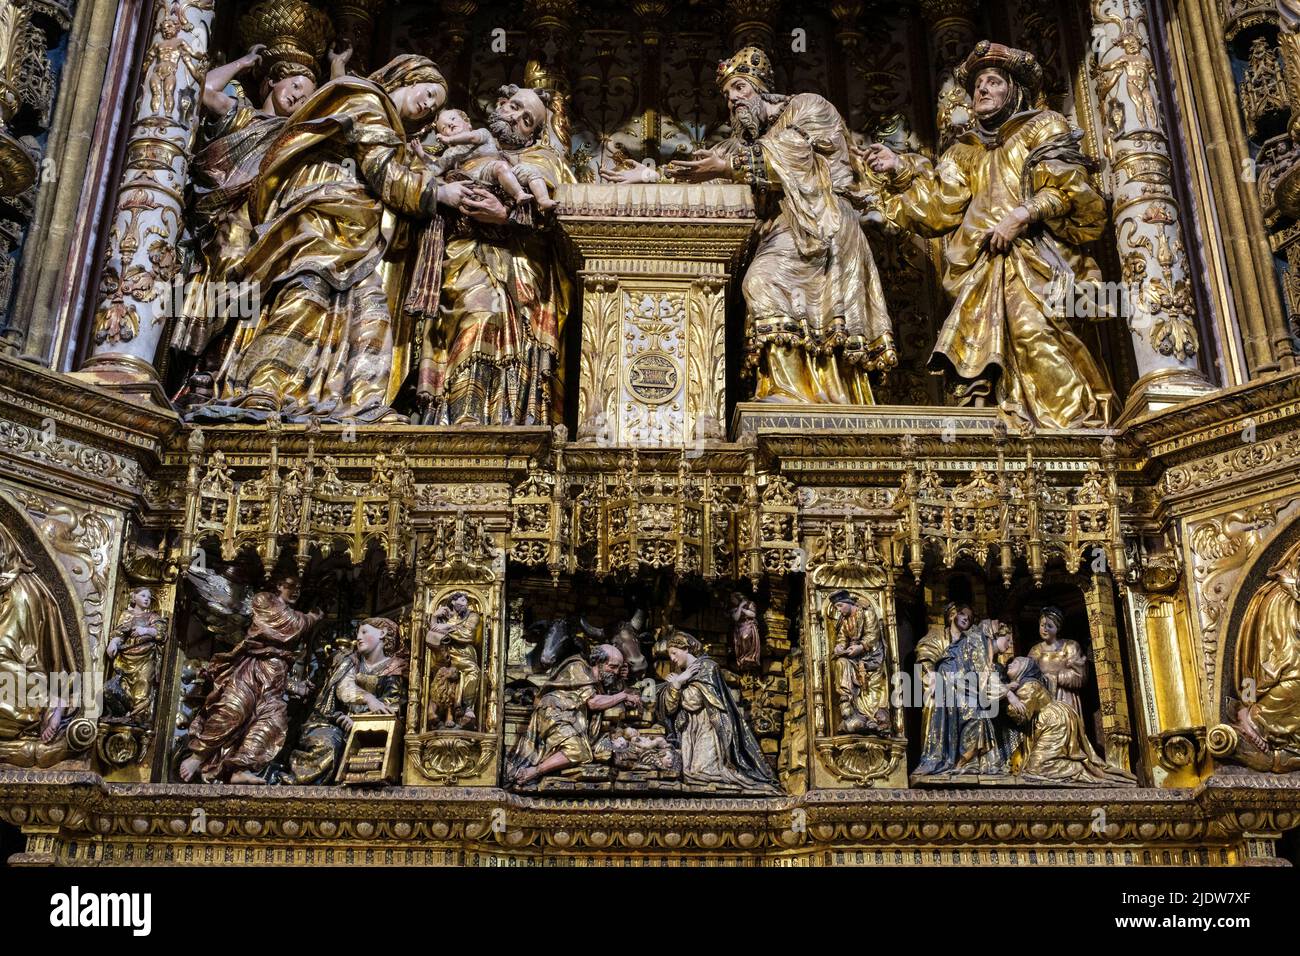 Spain, Burgos. Cathedral of Santa Maria, a World Heritage Site. Detail of the Altarpiece in the Capilla de los Condestables. Stock Photo